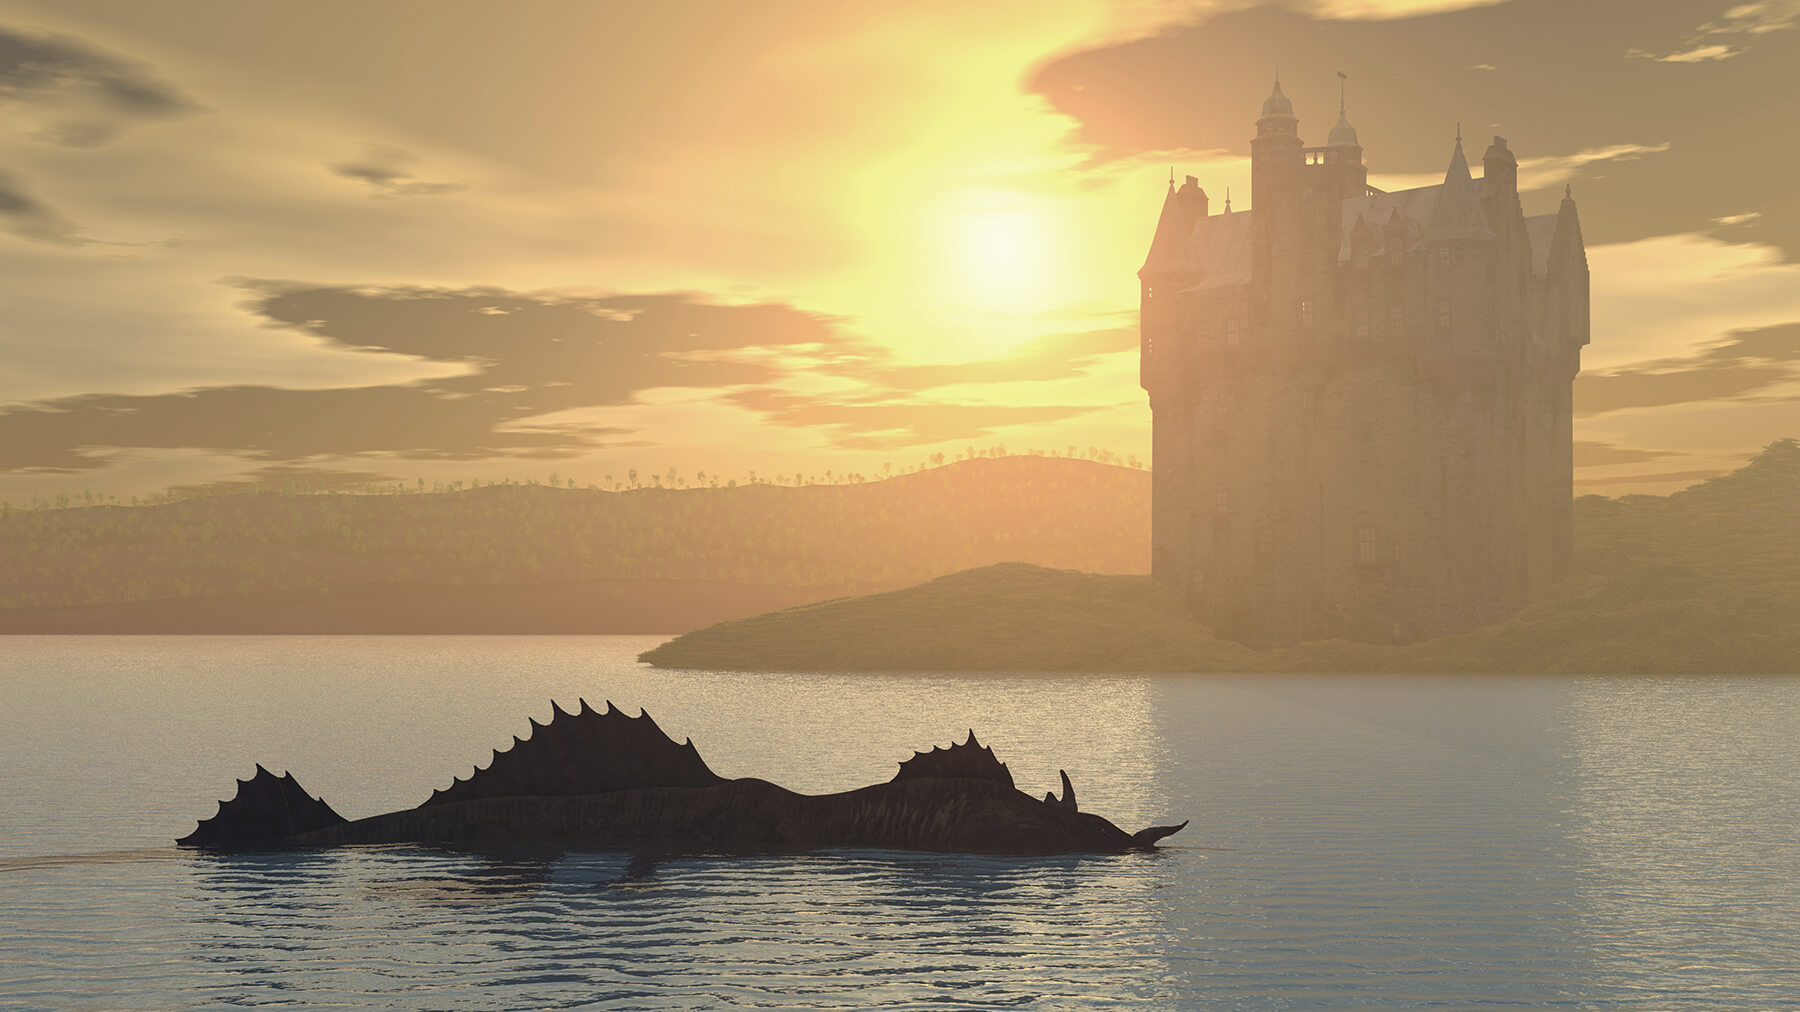 Computer generated 3D illustration with Loch Ness Monster and Scottish Castle